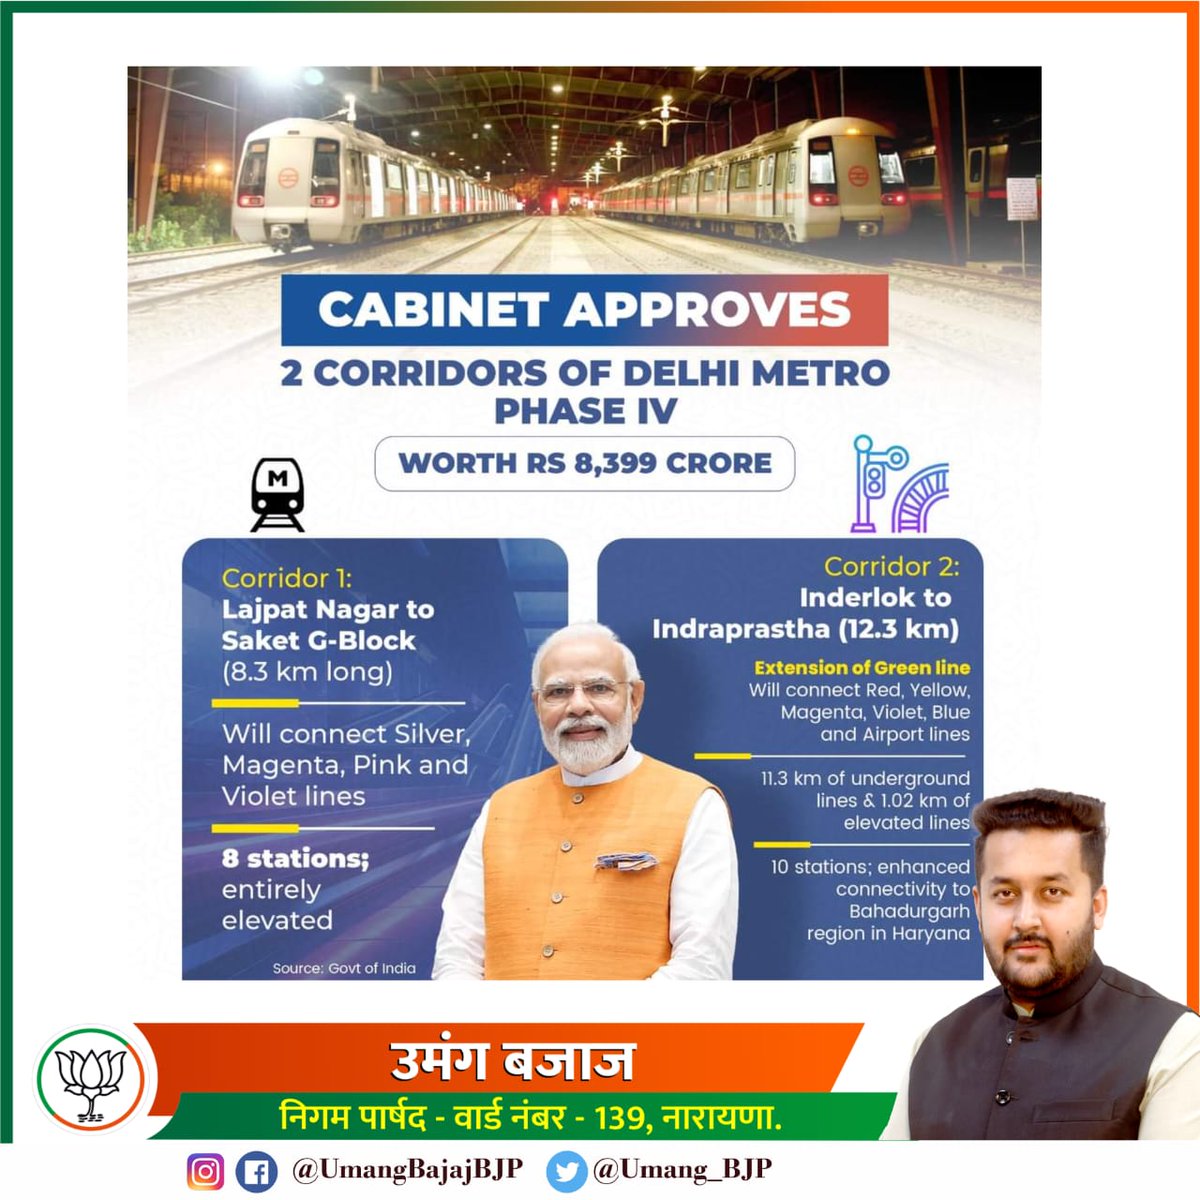 Two new corridors of Delhi Metro's Phase-IV have been approved by the Union Cabinet to further improve Metro connectivity in the national capital.

#CabinetDecisions